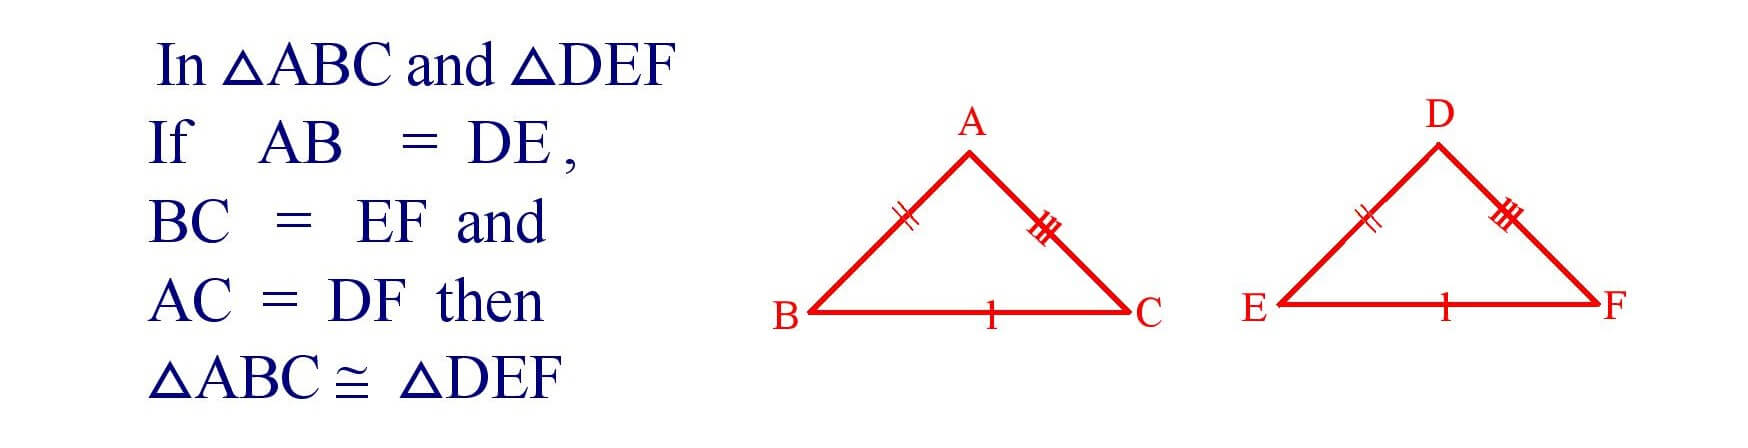 S - S - S Congruence of Triangles